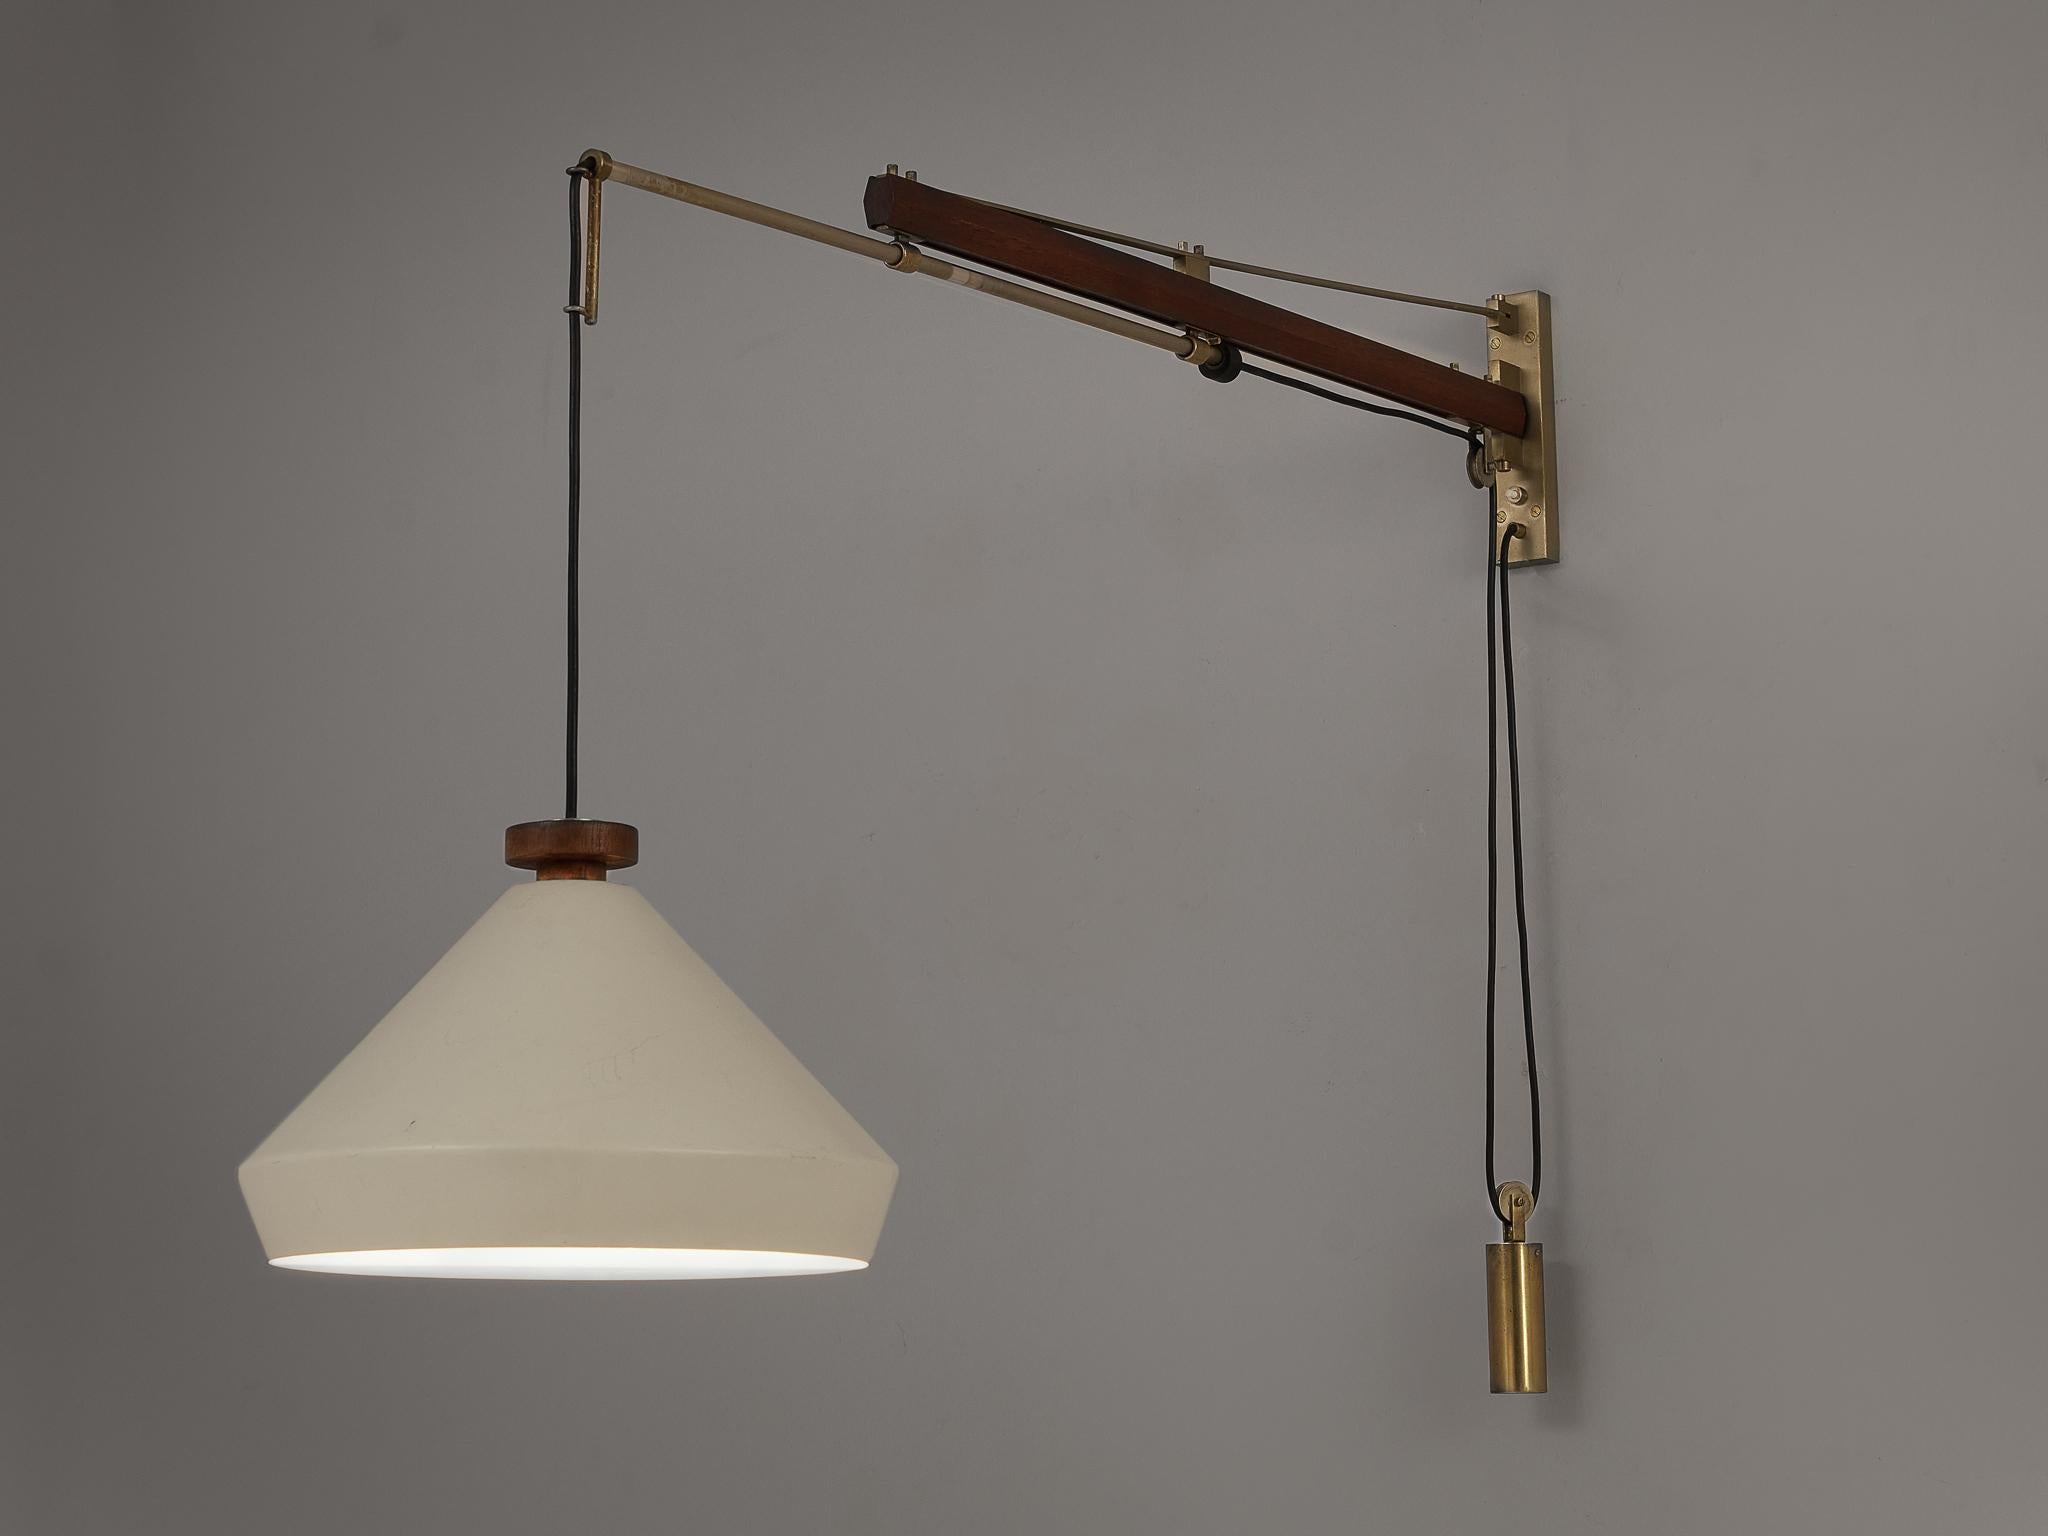 Tito Agnoli for O-Luce, wall light, coated aluminum, teak, brass, Italy, circa 1950. 

This remarkable wall-mounted light, created by designer Tito Agnoli and produced by O-Luce around 1950, is a captivating blend of teak, metal, and brass. Notably,